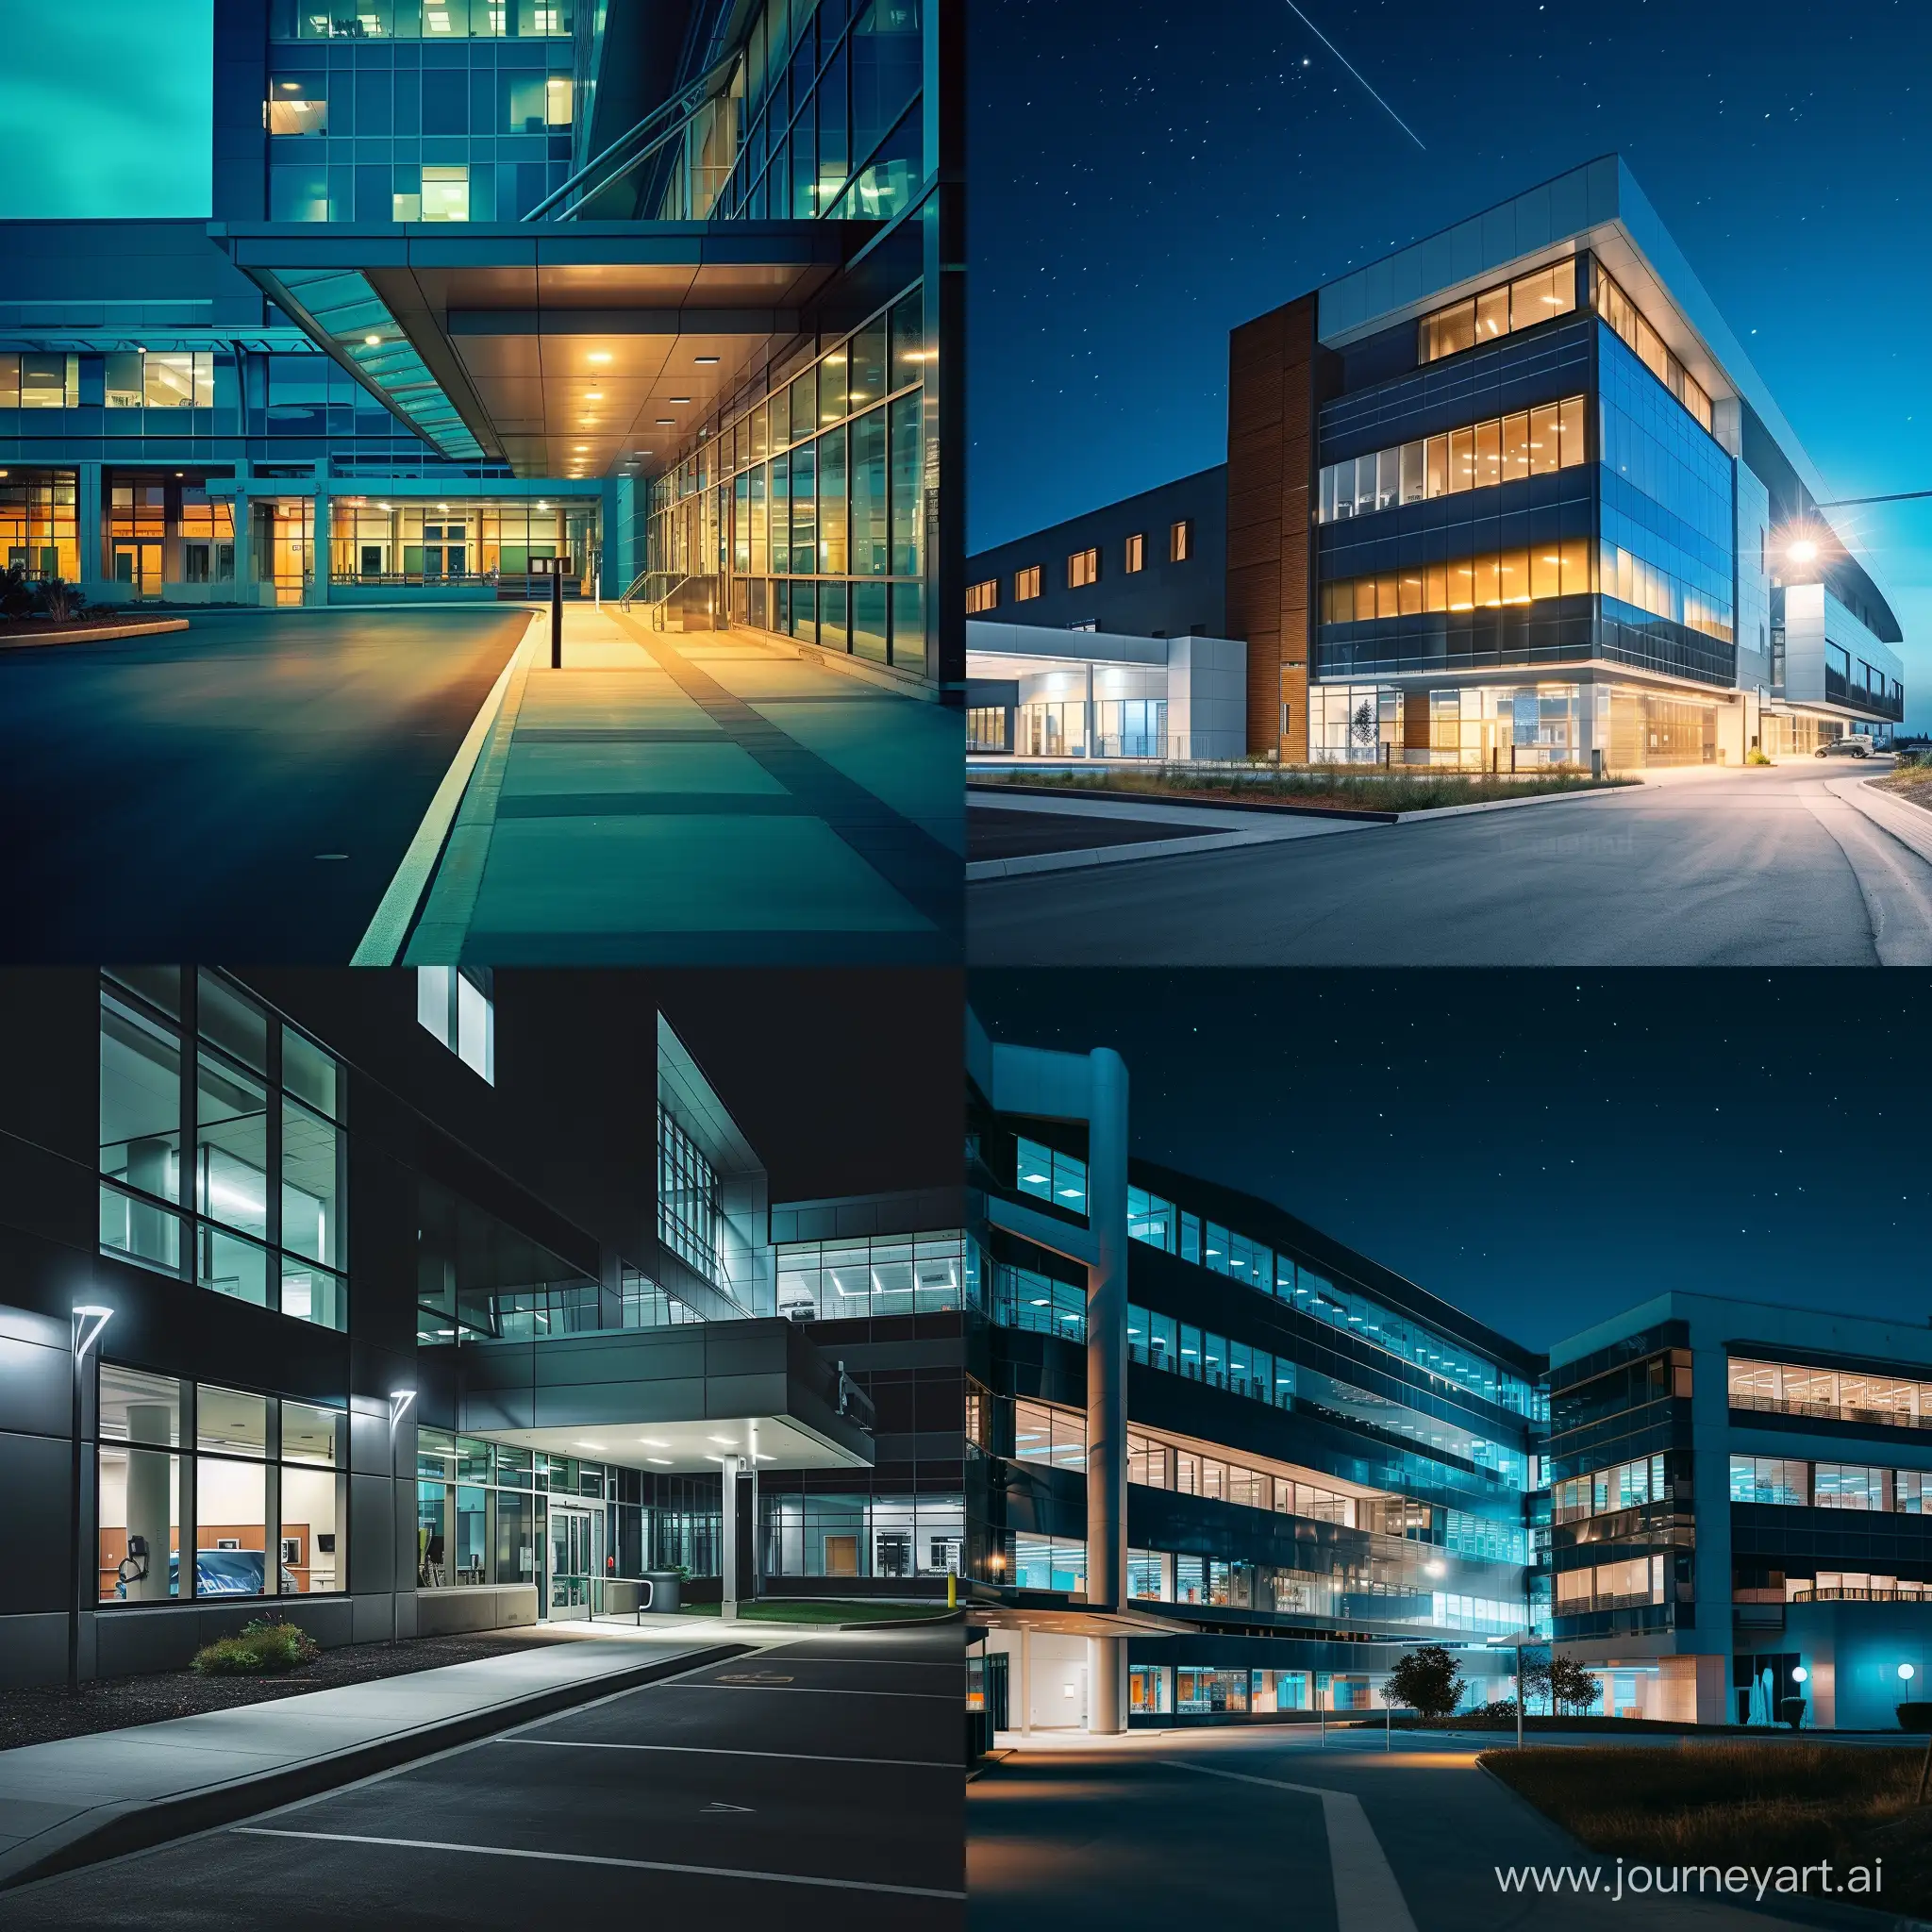 A cinematic photo of a modern hospital exterior at night